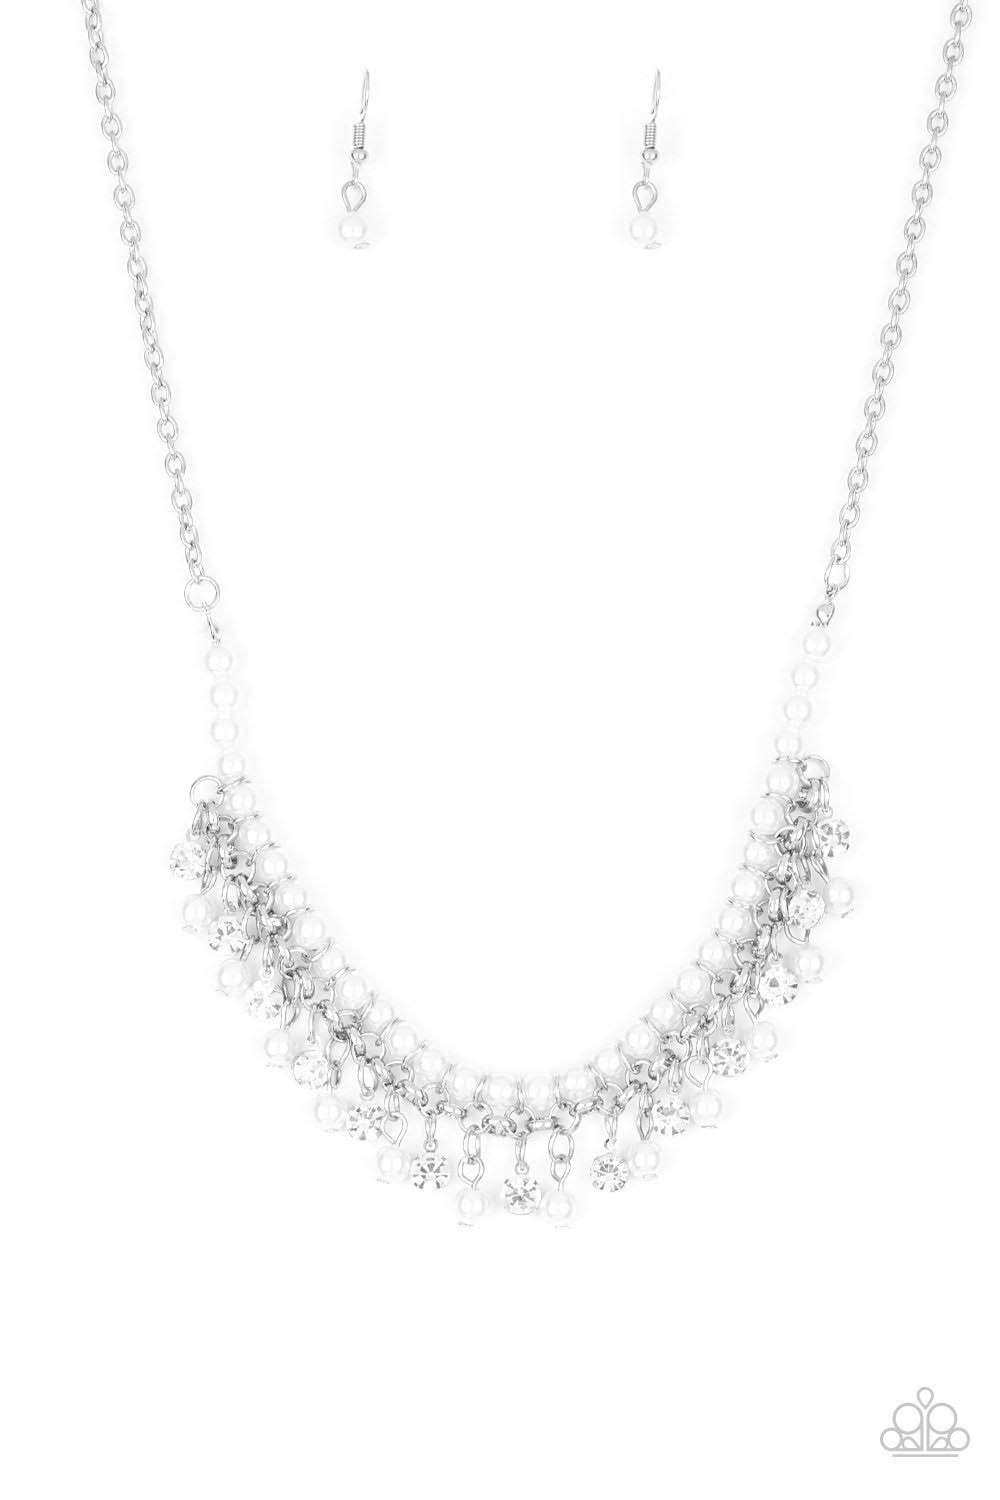 A Touch of CLASSY - White Necklace Set